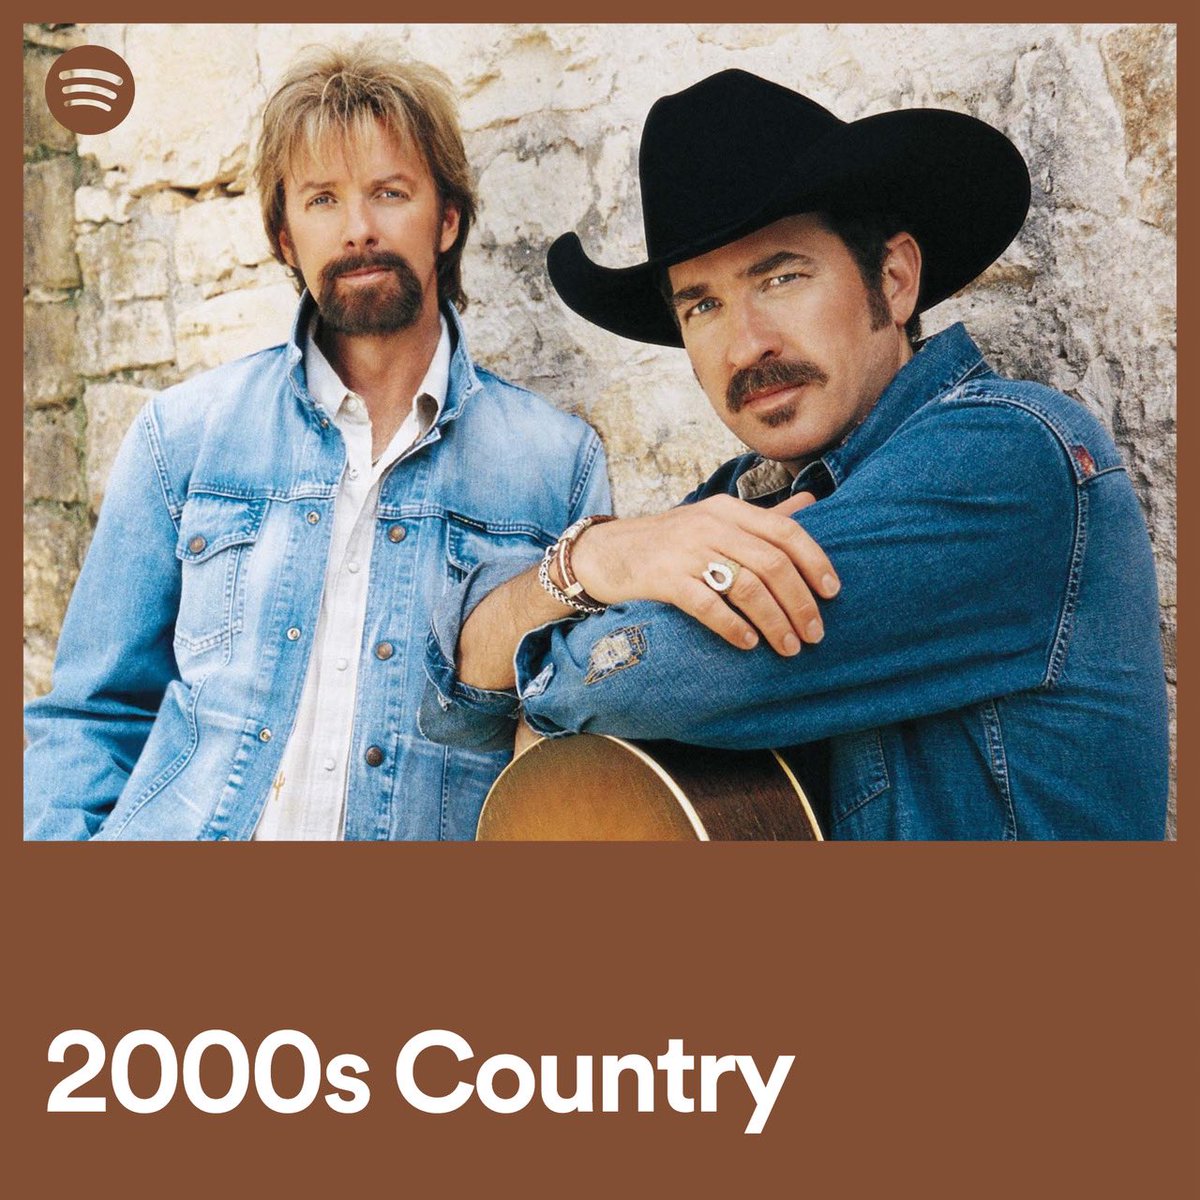 Check out @RonnieDunn and @KixBrooks on the cover of @Spotify’s #2000sCountry playlist! Listen here: open.spotify.com/playlist/37i9d…